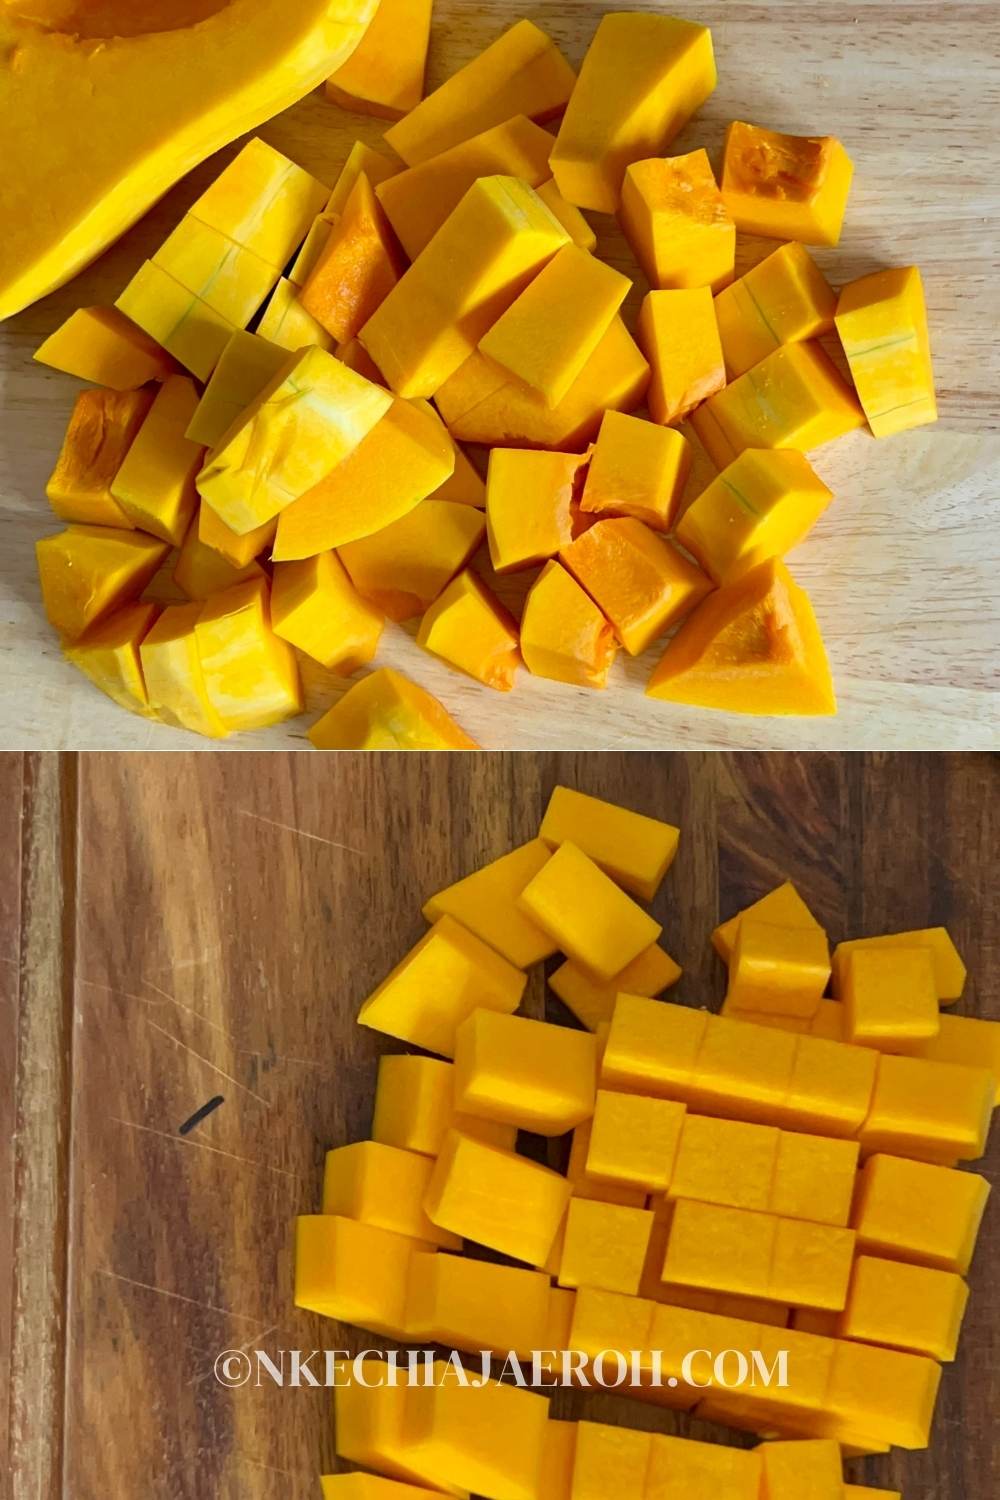 Butternut squash is a kind of winter squash; it is also known as autumn squash. Butternut squash has a hard tan exterior and a yellowish orange inside. It turns deep orange as it ripens. A butternut squash has a sweet, nutty taste. This vegetable is similar to pumpkin both in color and taste. Learn how to peel and cut butternut squash!